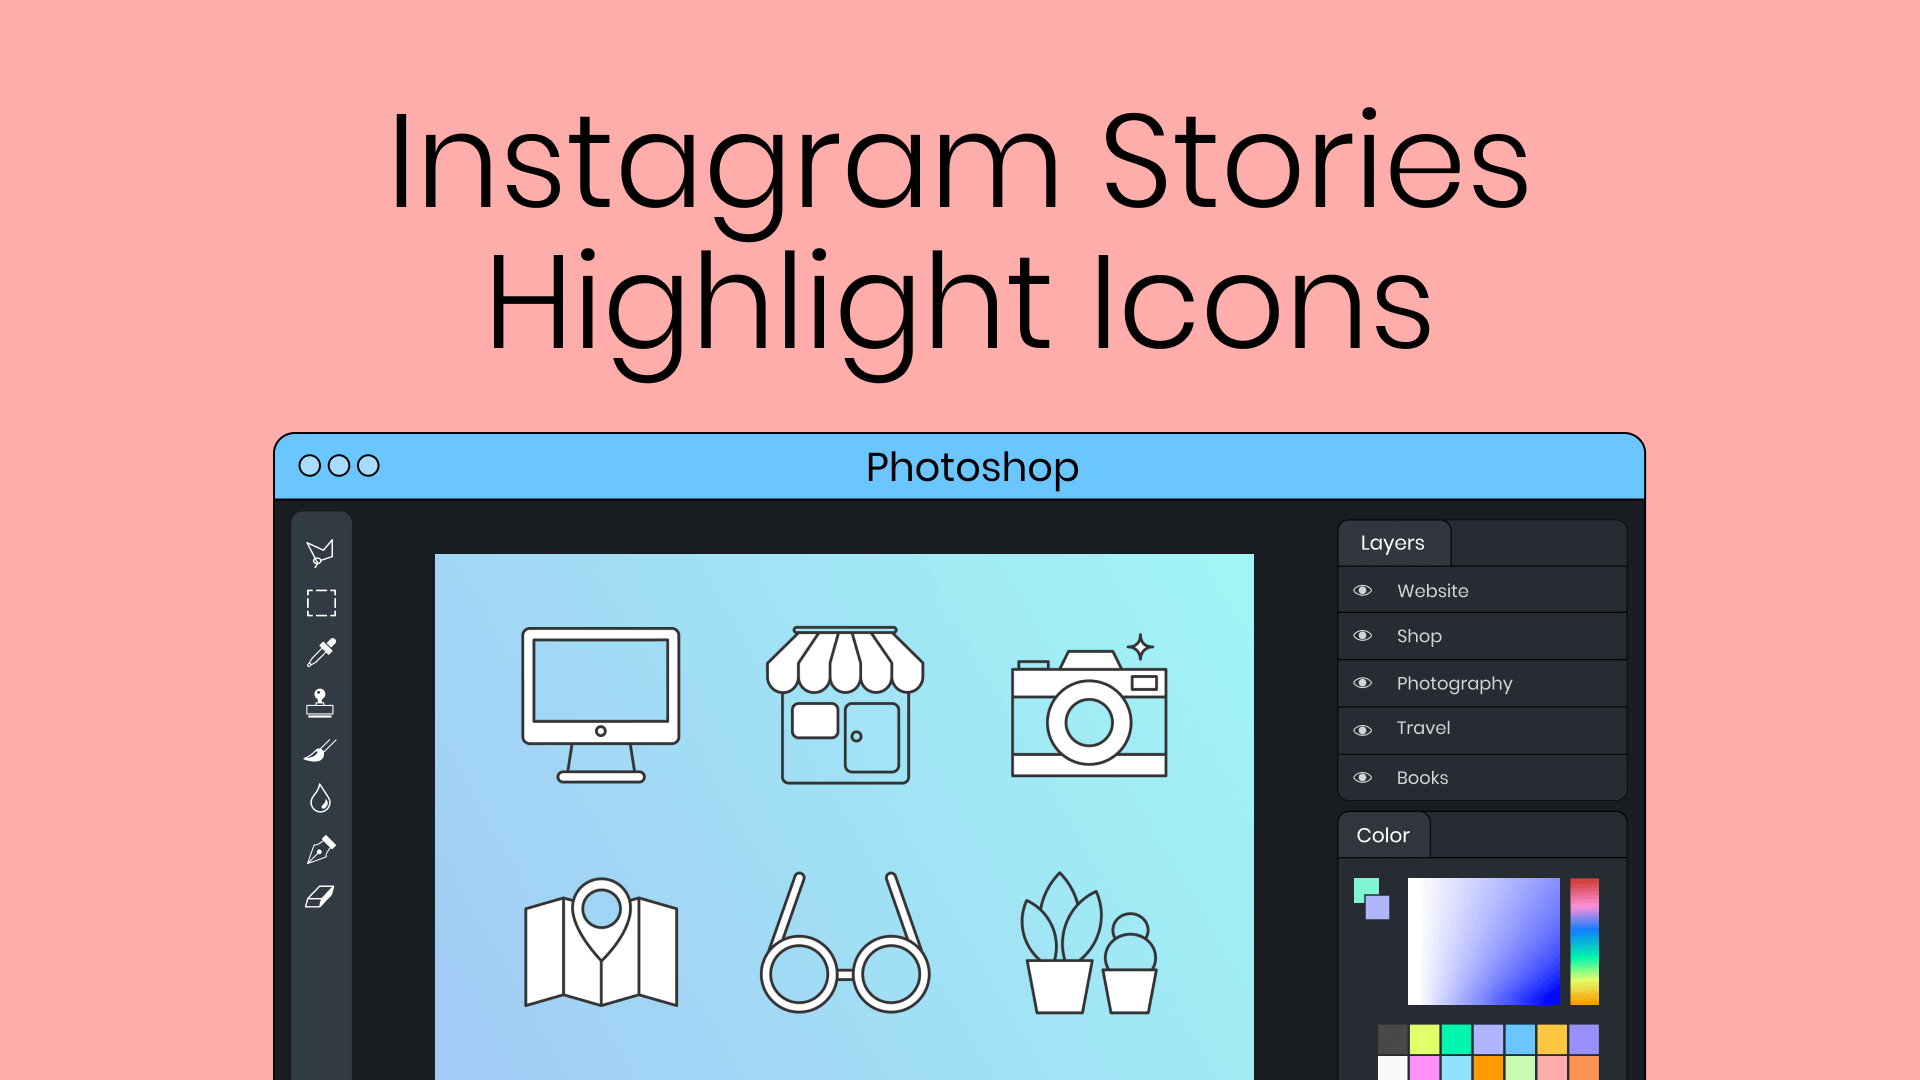 Thumbnail image showing different highlight icons to use in Instagram Stories, including icons of glasses, plants, and more